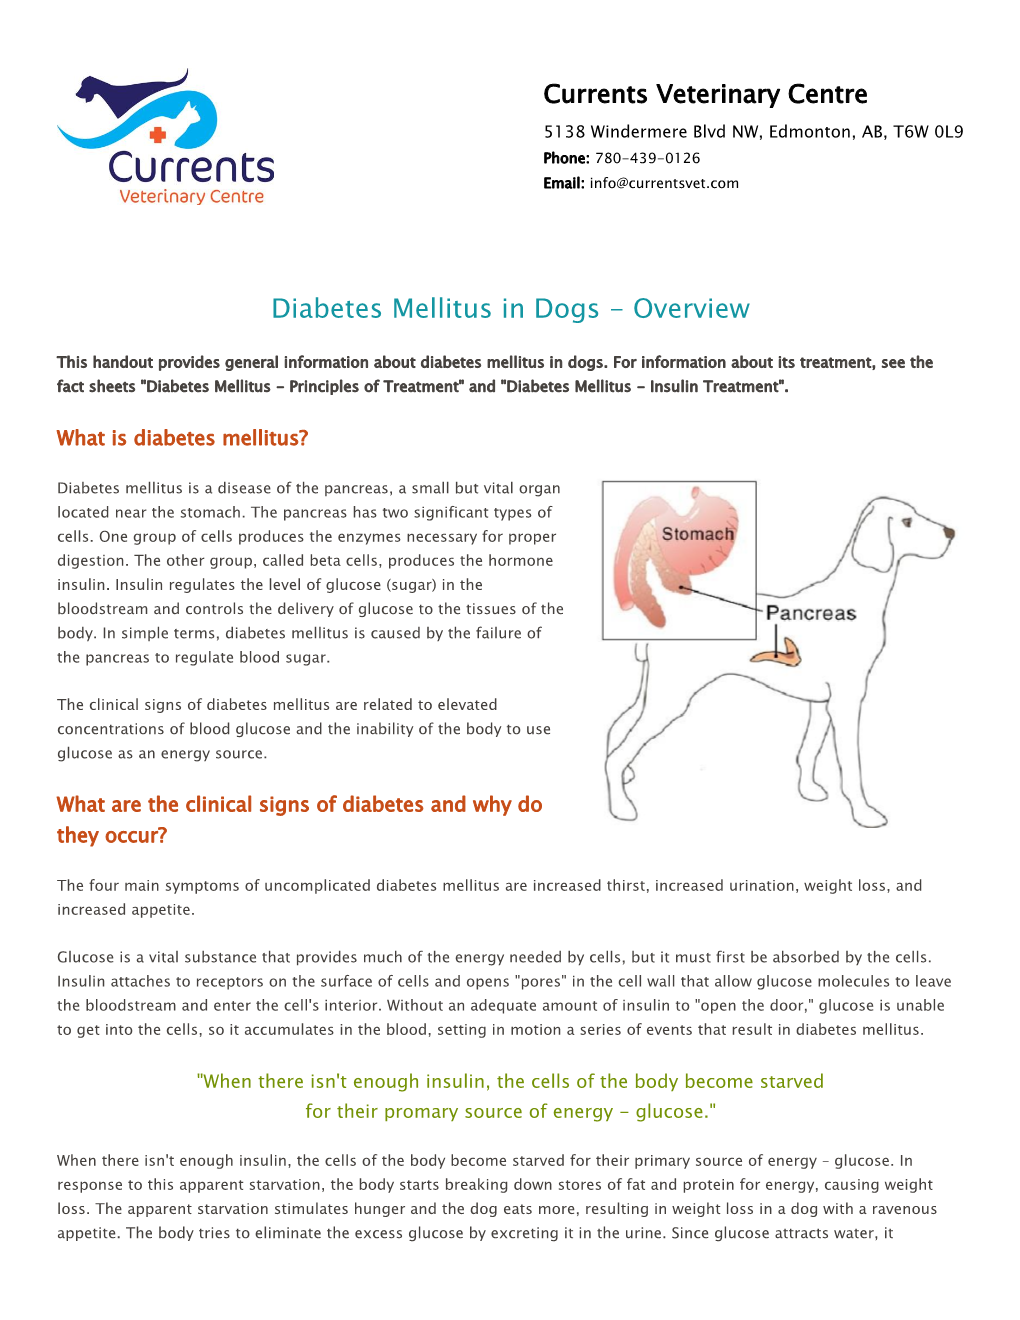 Diabetes Mellitus in Dogs - Overview